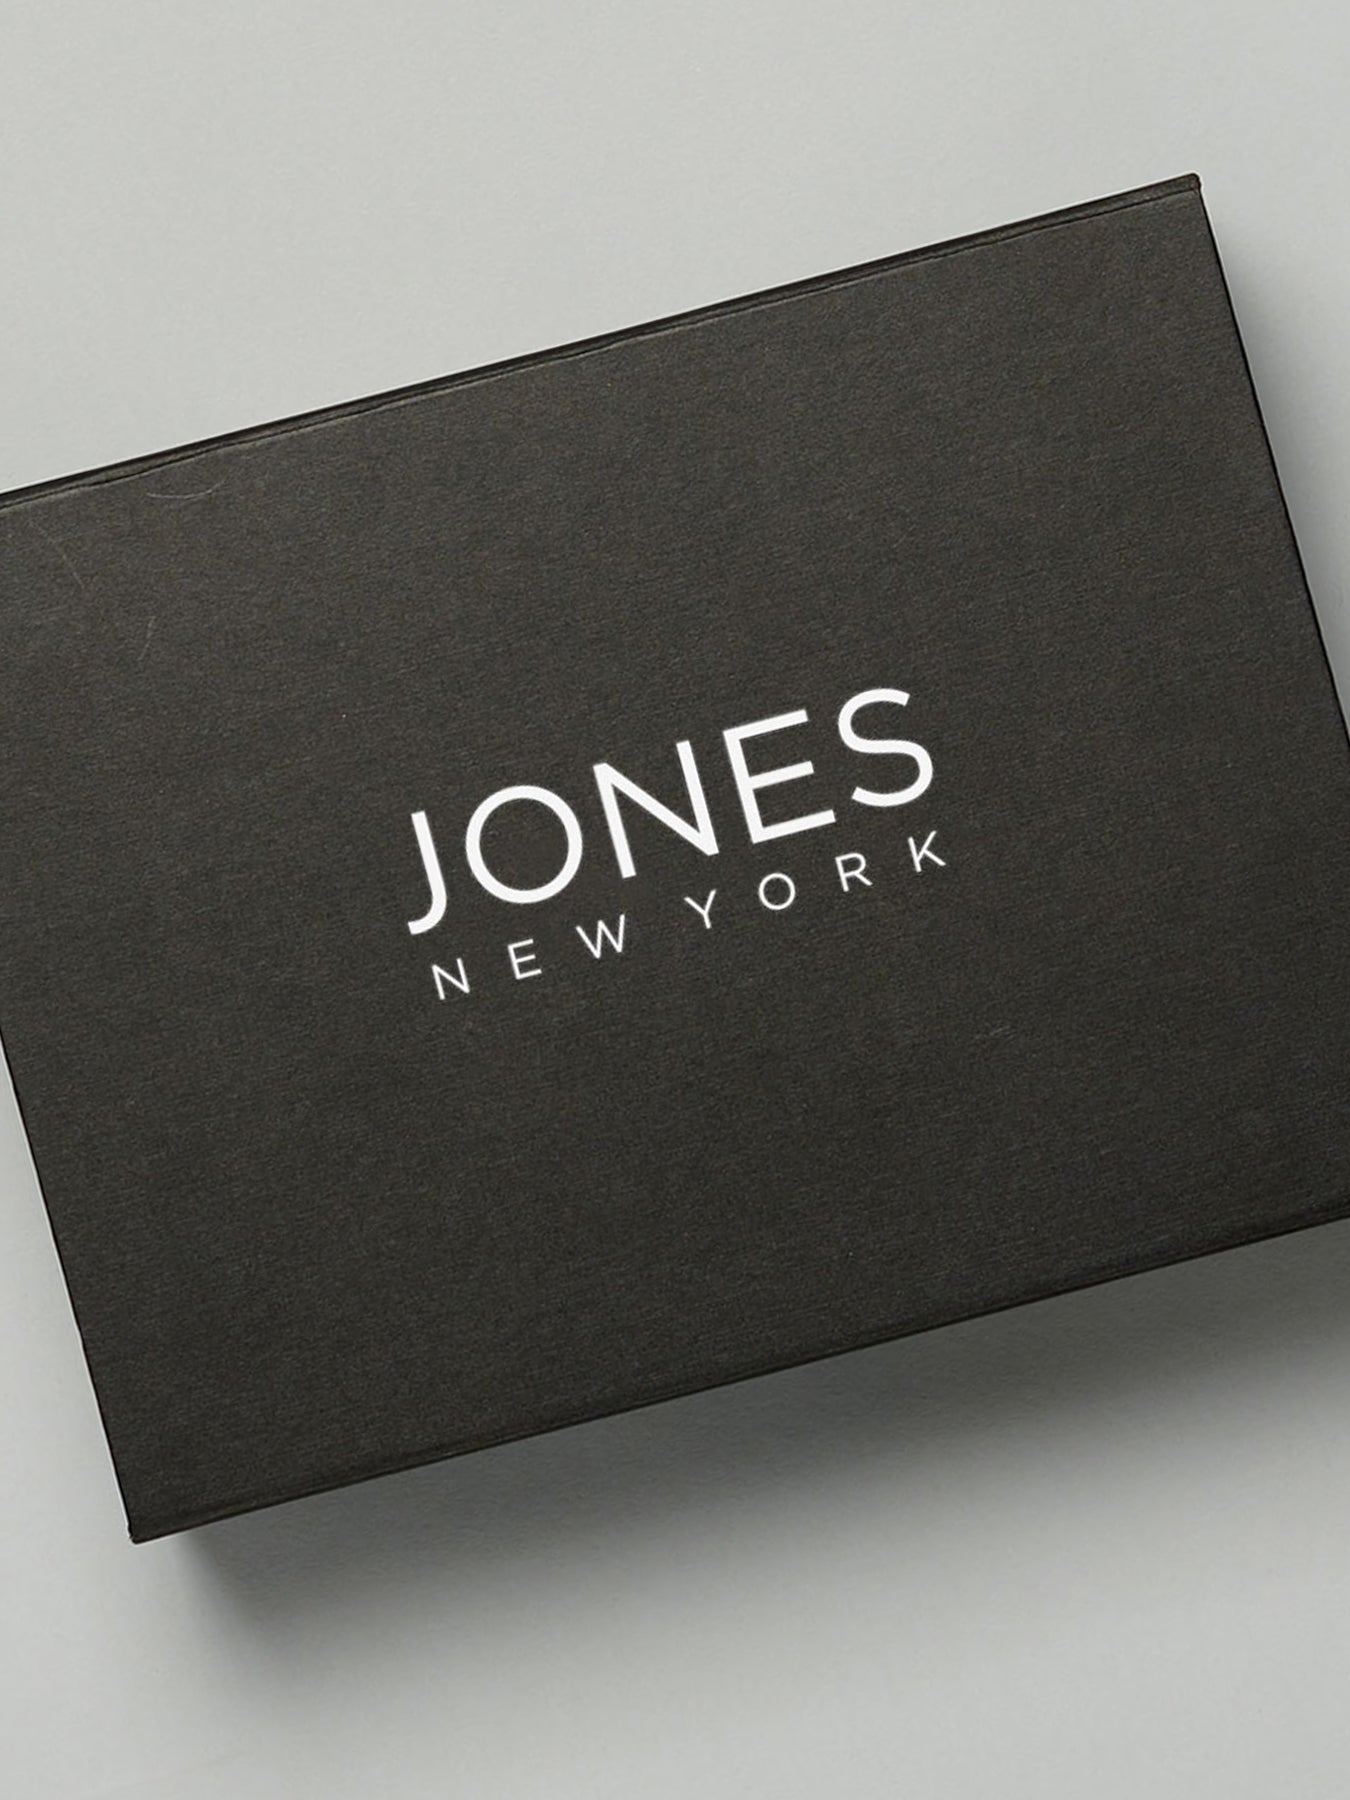 Jones New York Relaunches With a Less 'Stodgy' Aesthetic - Fashionista